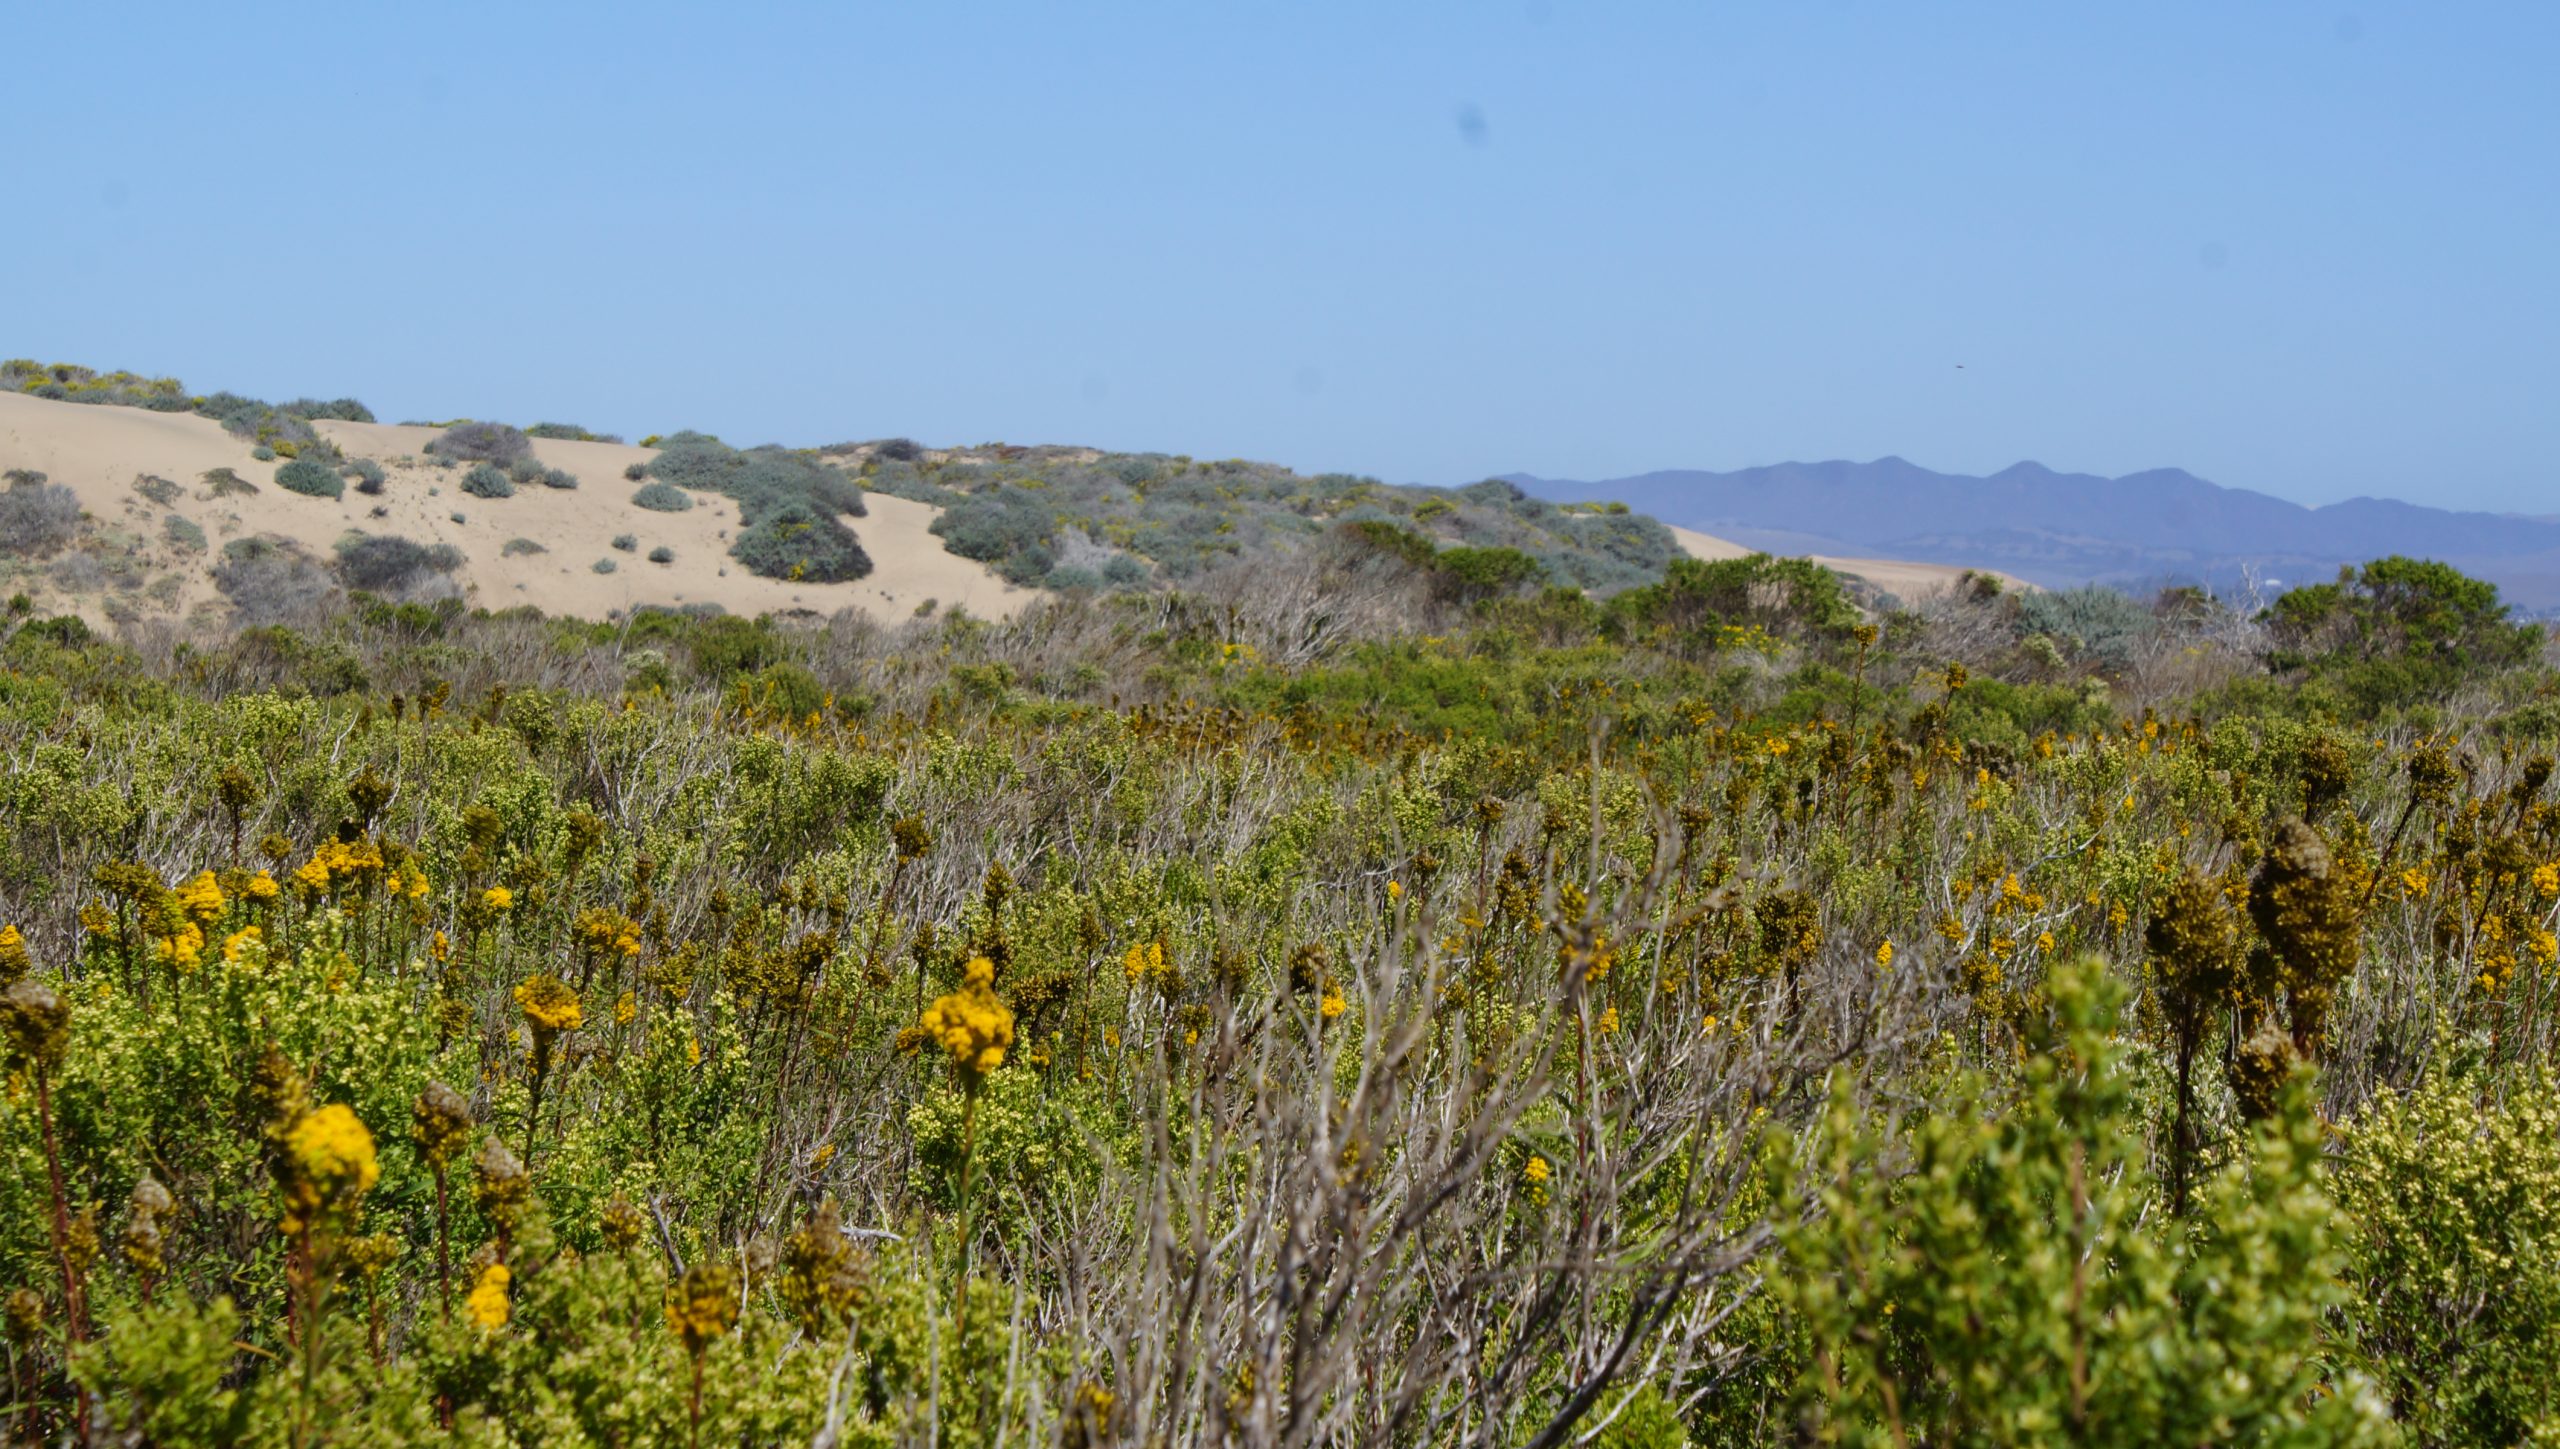 Morro Dunes Trail – Riding the SLO County Trails | SLO Horse News